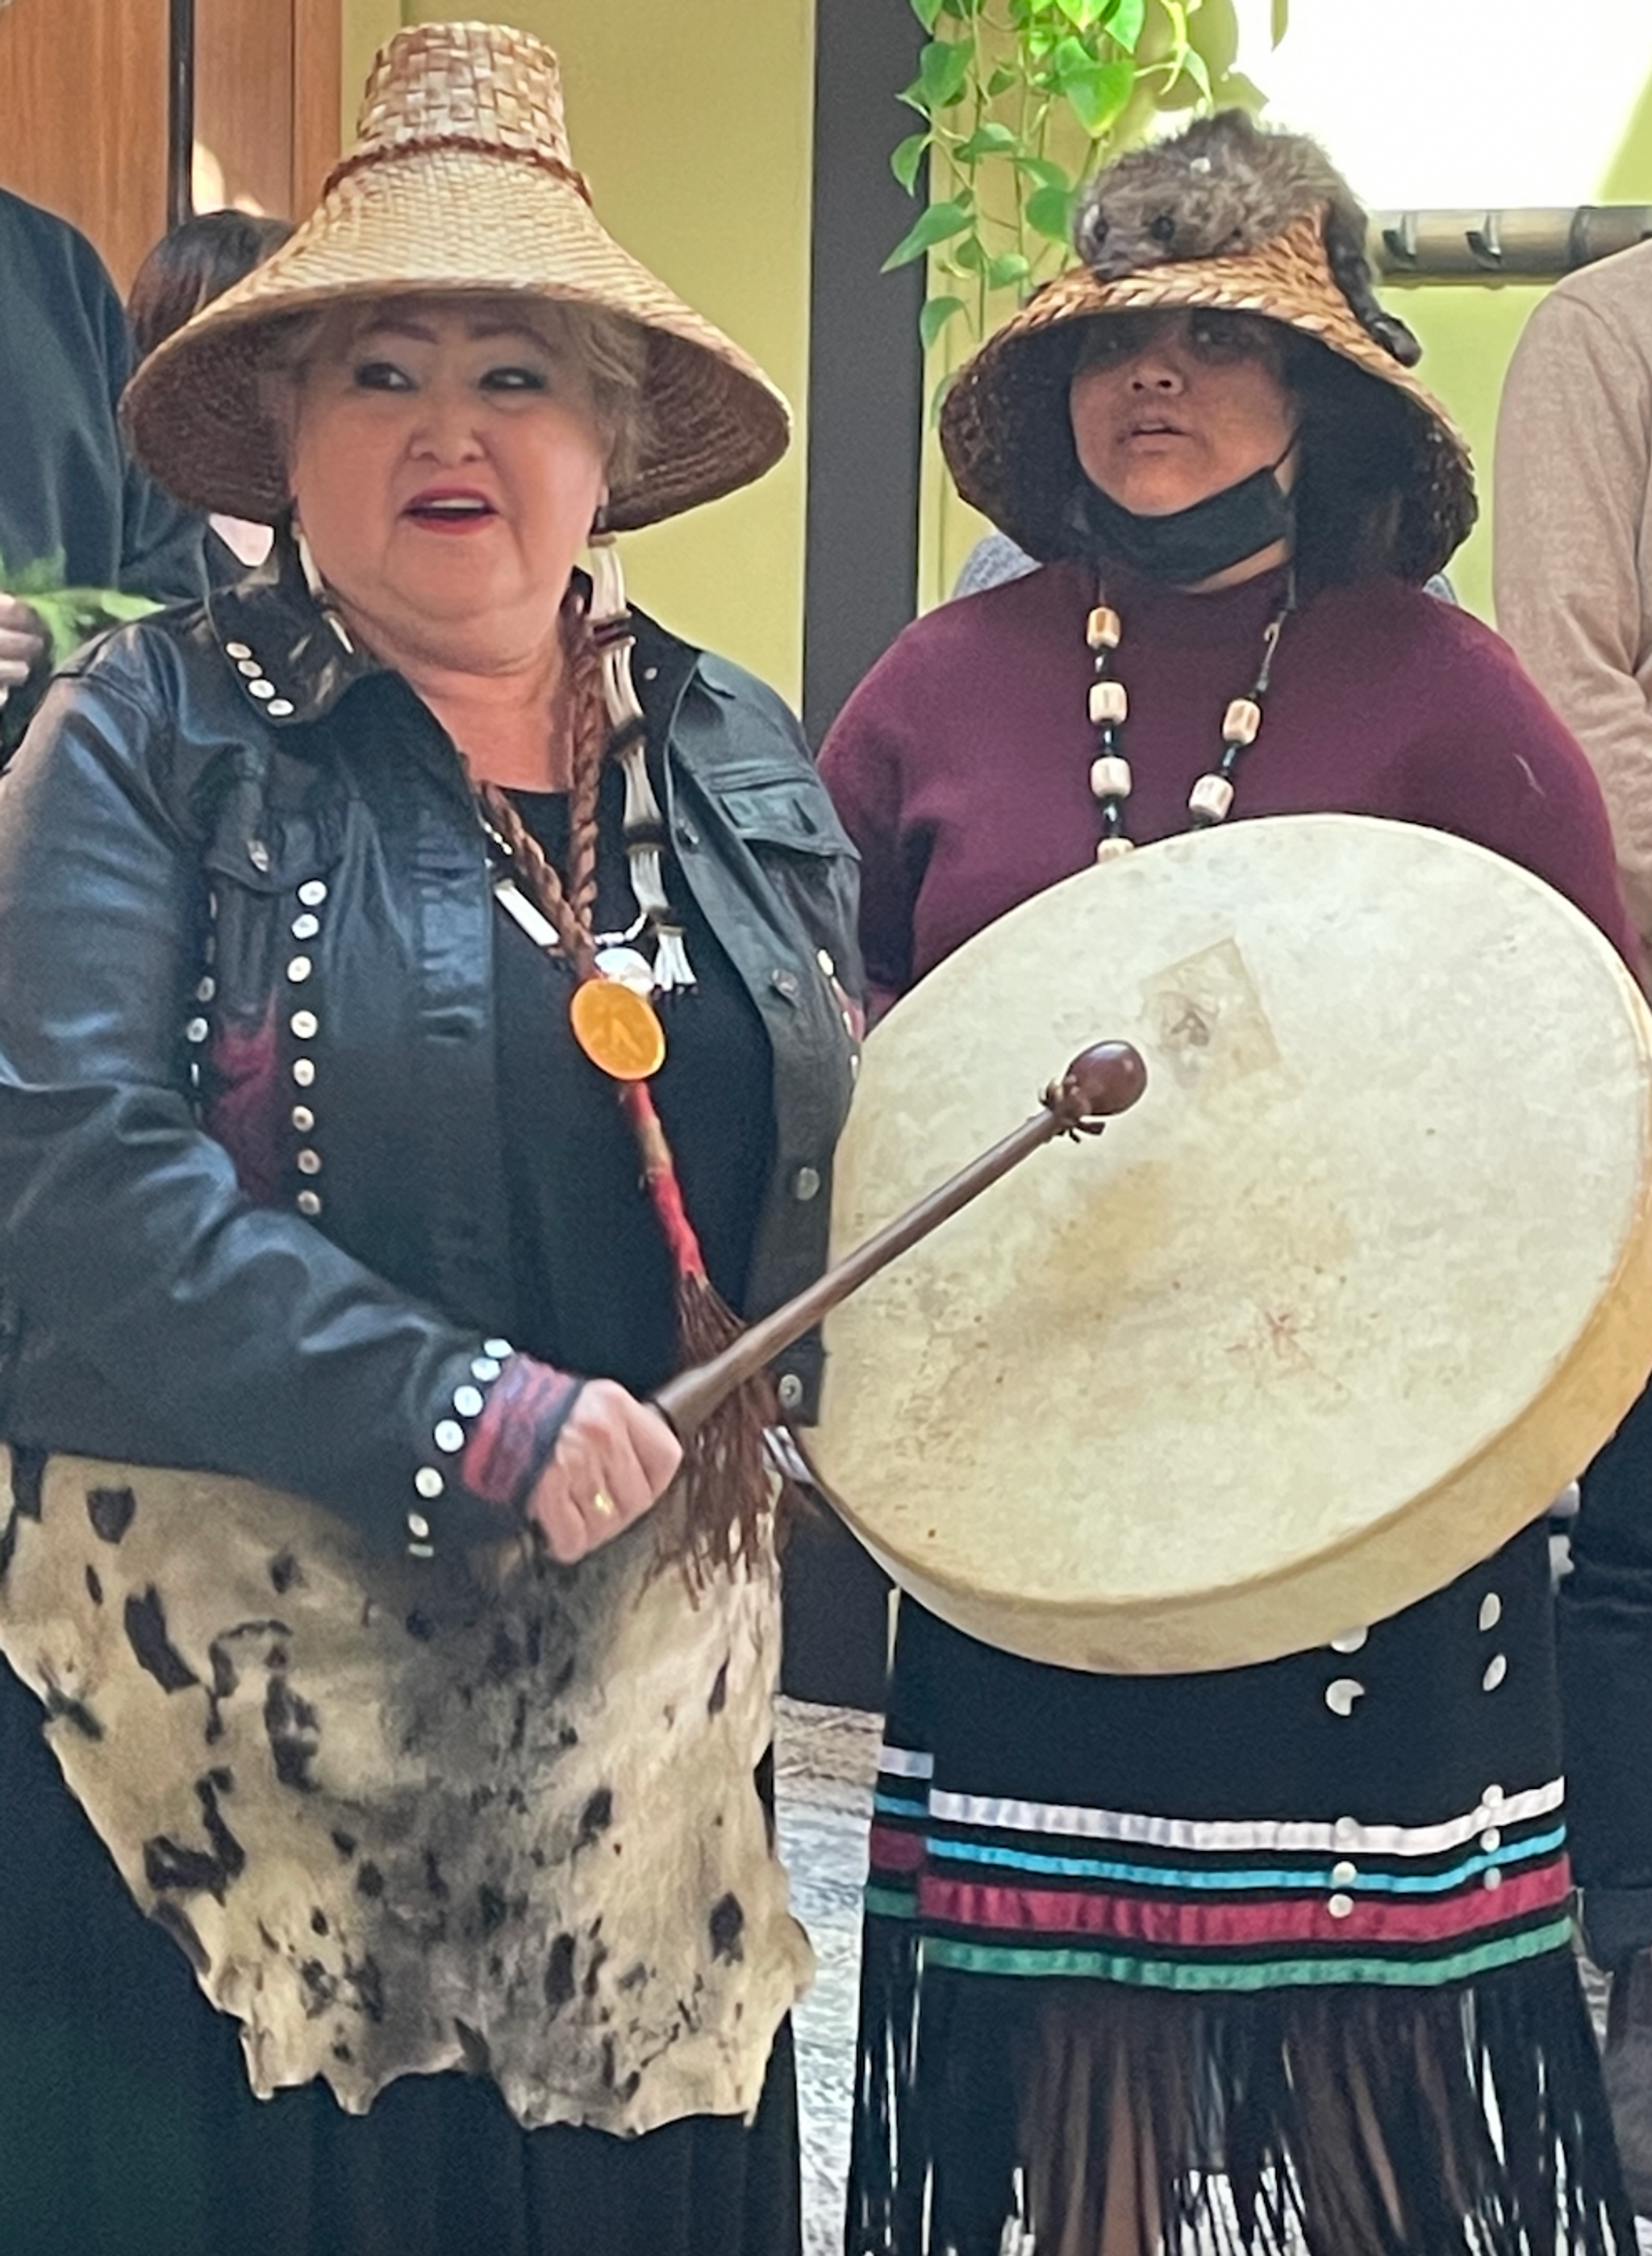 Elder, Jessica Sault of Tseshaht First Nation (Nuu chah nulth) and Cheyanne 